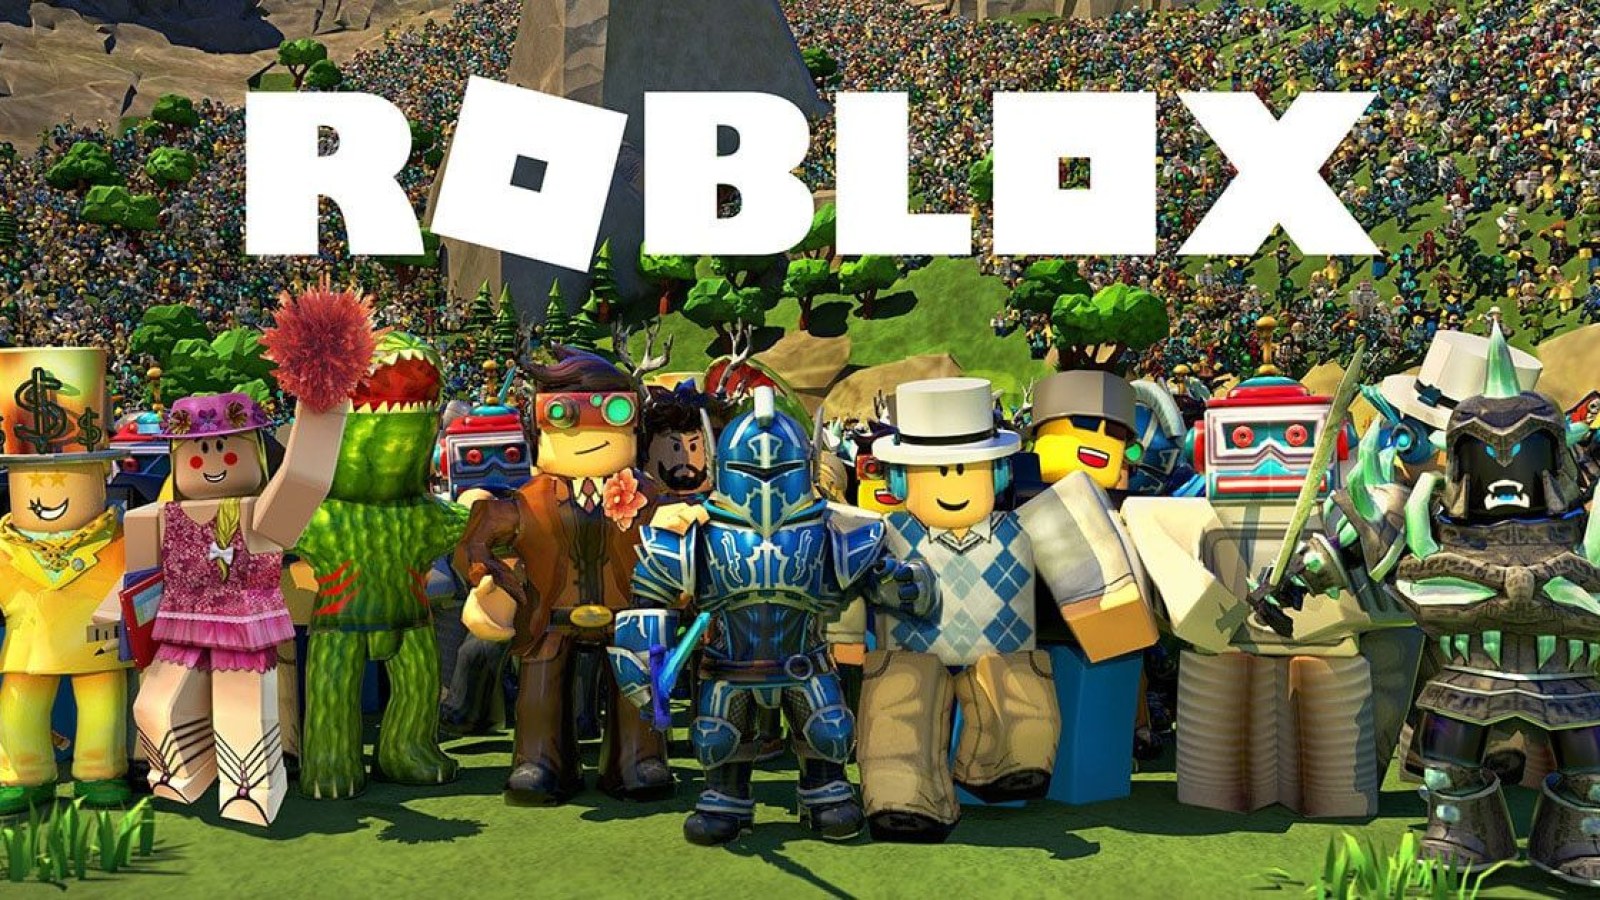 Roblox And Nfl Team Up To Give Players Free Team Helmets Here S